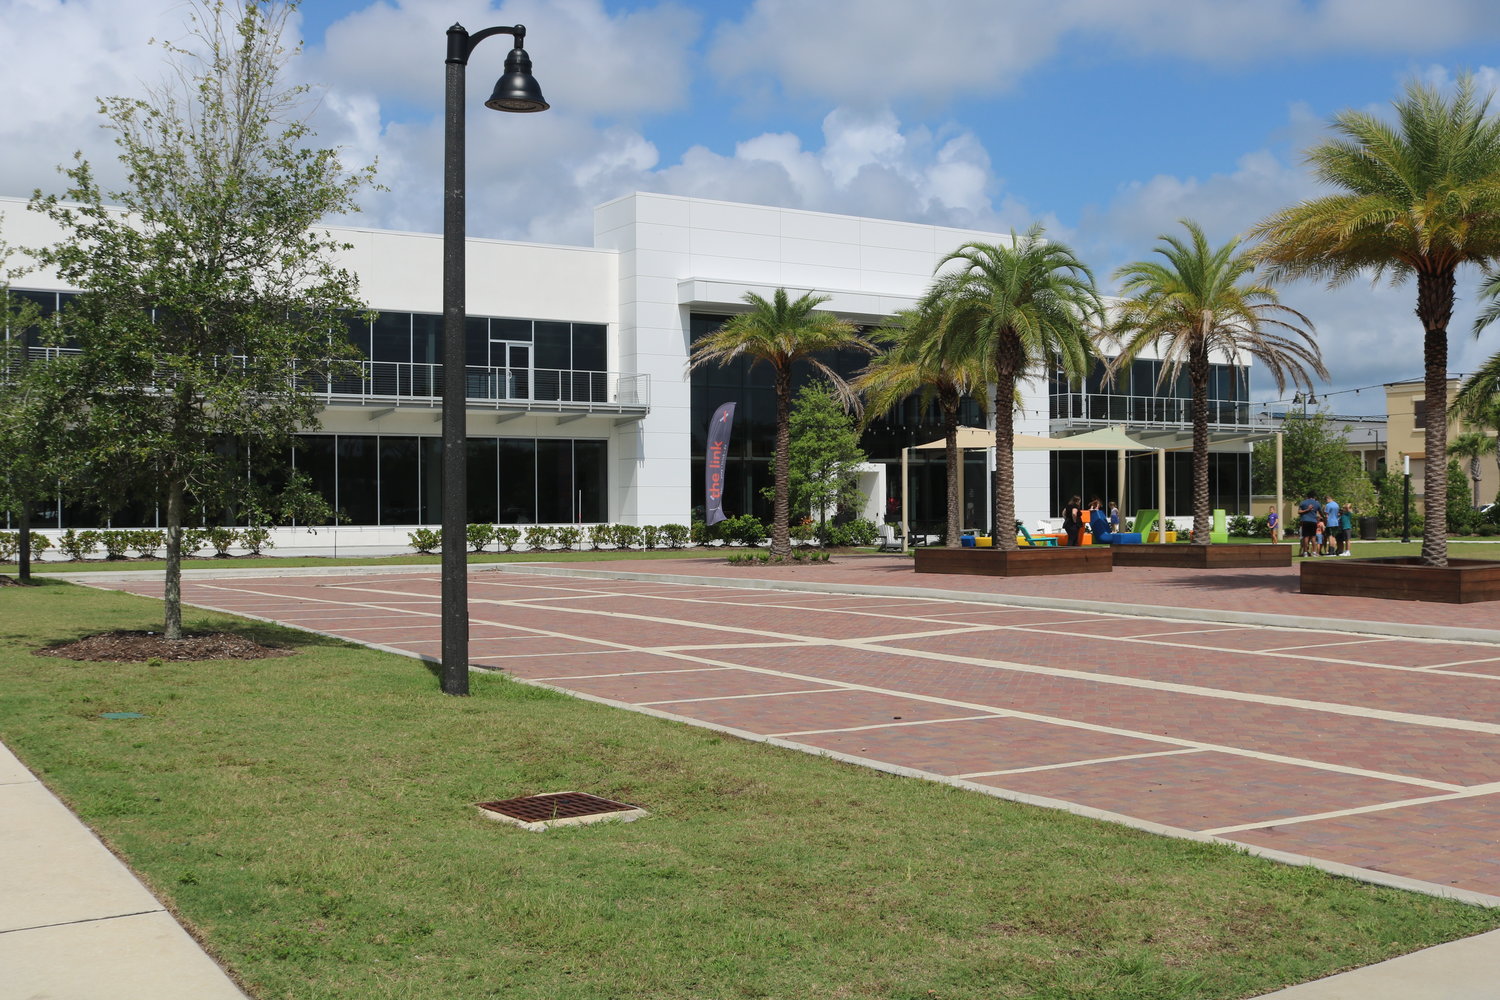 The link is the newest addition to the Nocatee Town Center community.